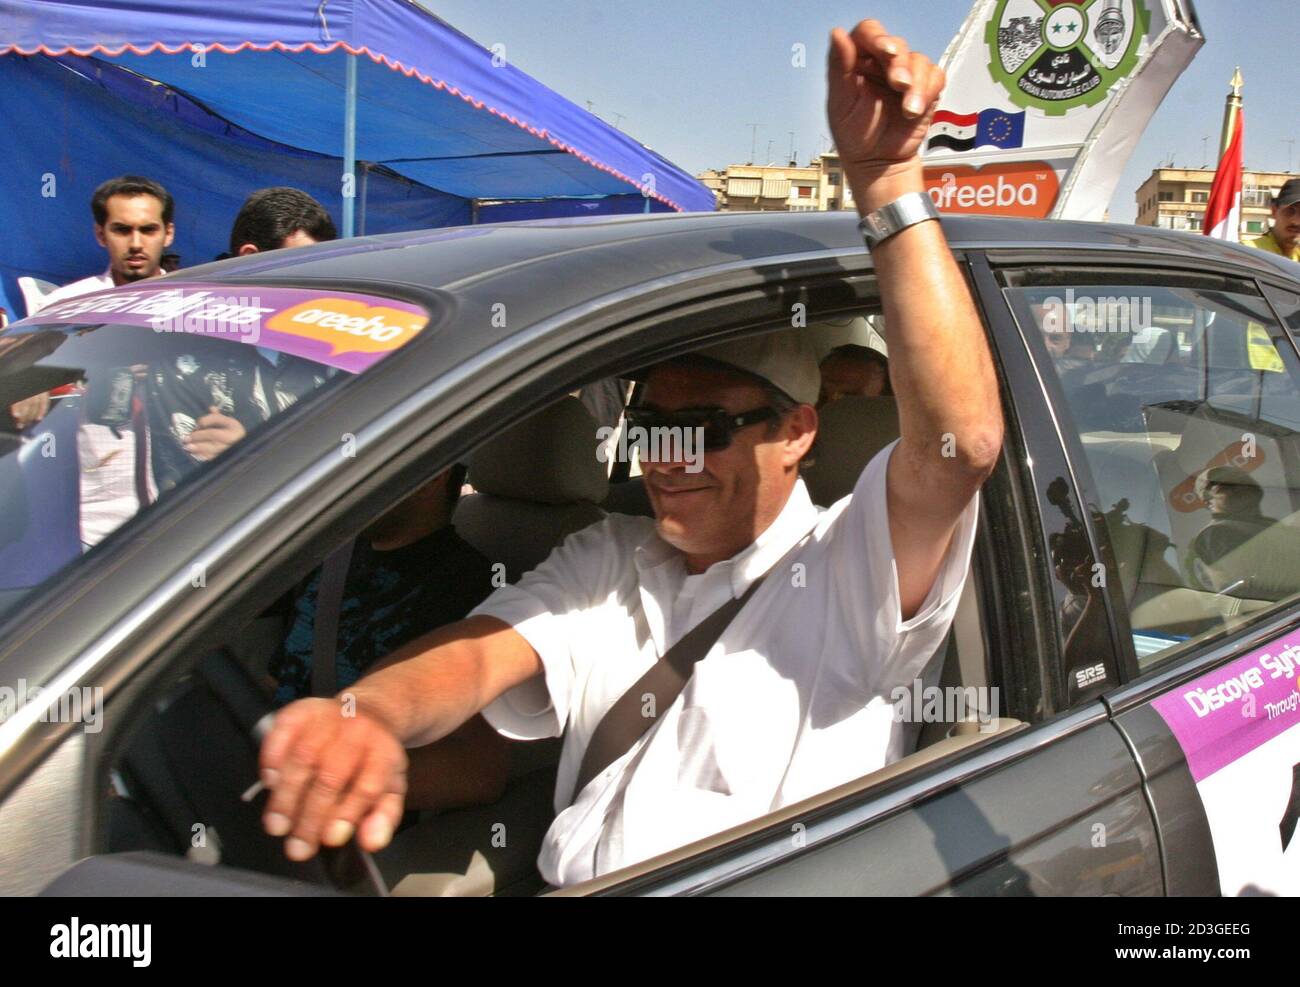 Egyptian Arab actor Farouq al-Fishawi gestures at the start of the Discover Syria Rally in Damascus May 11, 2005. Forty five participants from the EU, Saudi Arabia, Jordan, Lebanon, Egypt, and Syria took part in the rally taking them around Syrian forests, mountains and deserts in a 900 km (559 miles) trip to discover historical sites. REUTERS/ Khaled al-Hariri  kh/SA Stock Photo